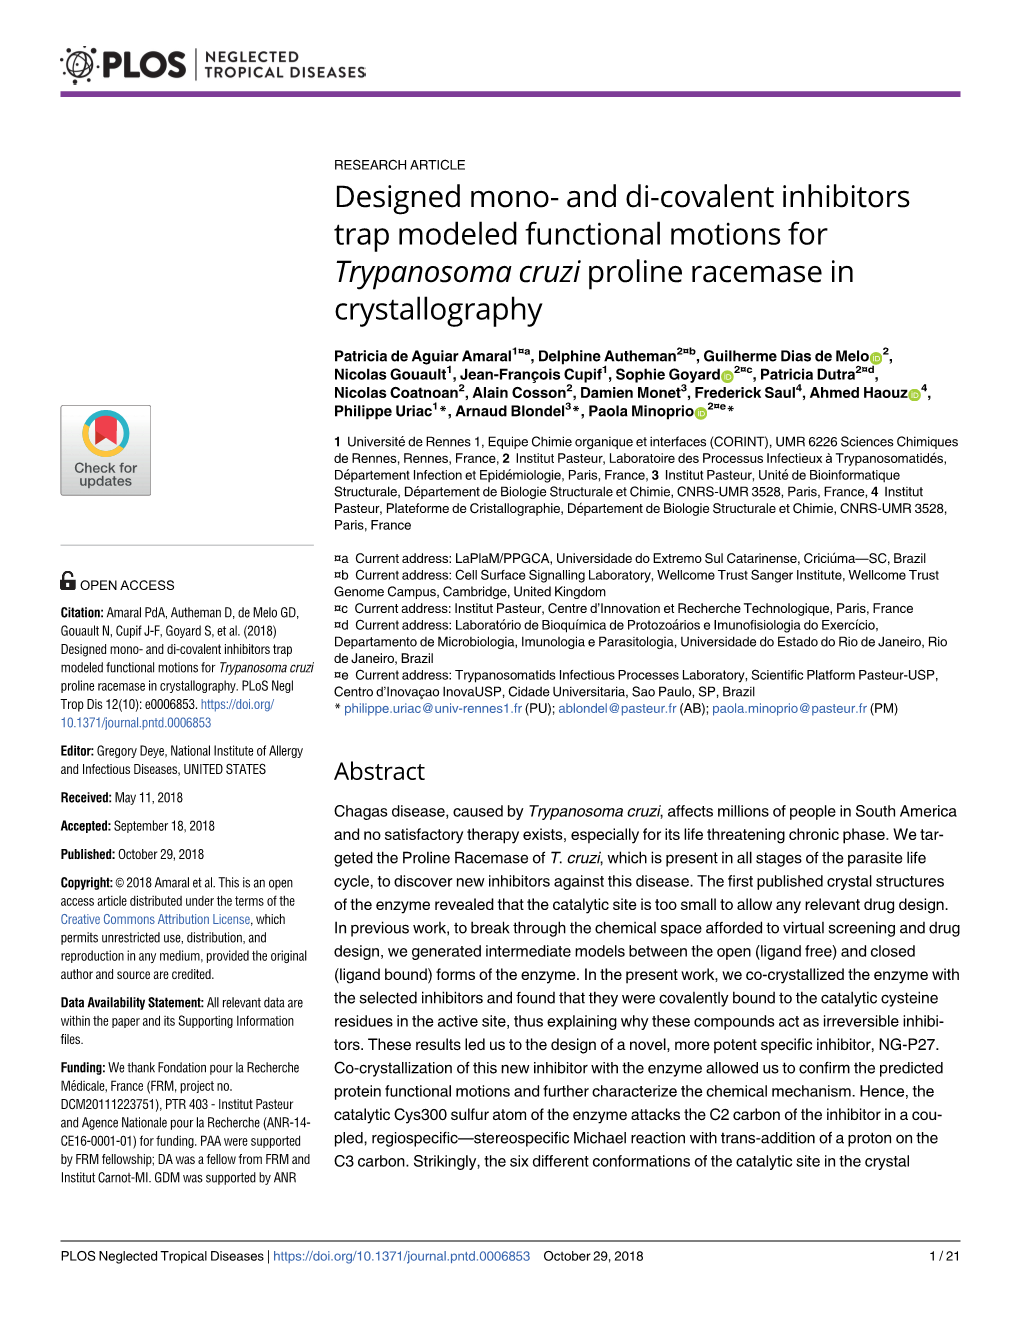 Designed Mono- and Di-Covalent Inhibitors Trap Modeled Functional Motions for Trypanosoma Cruzi Proline Racemase in Crystallography